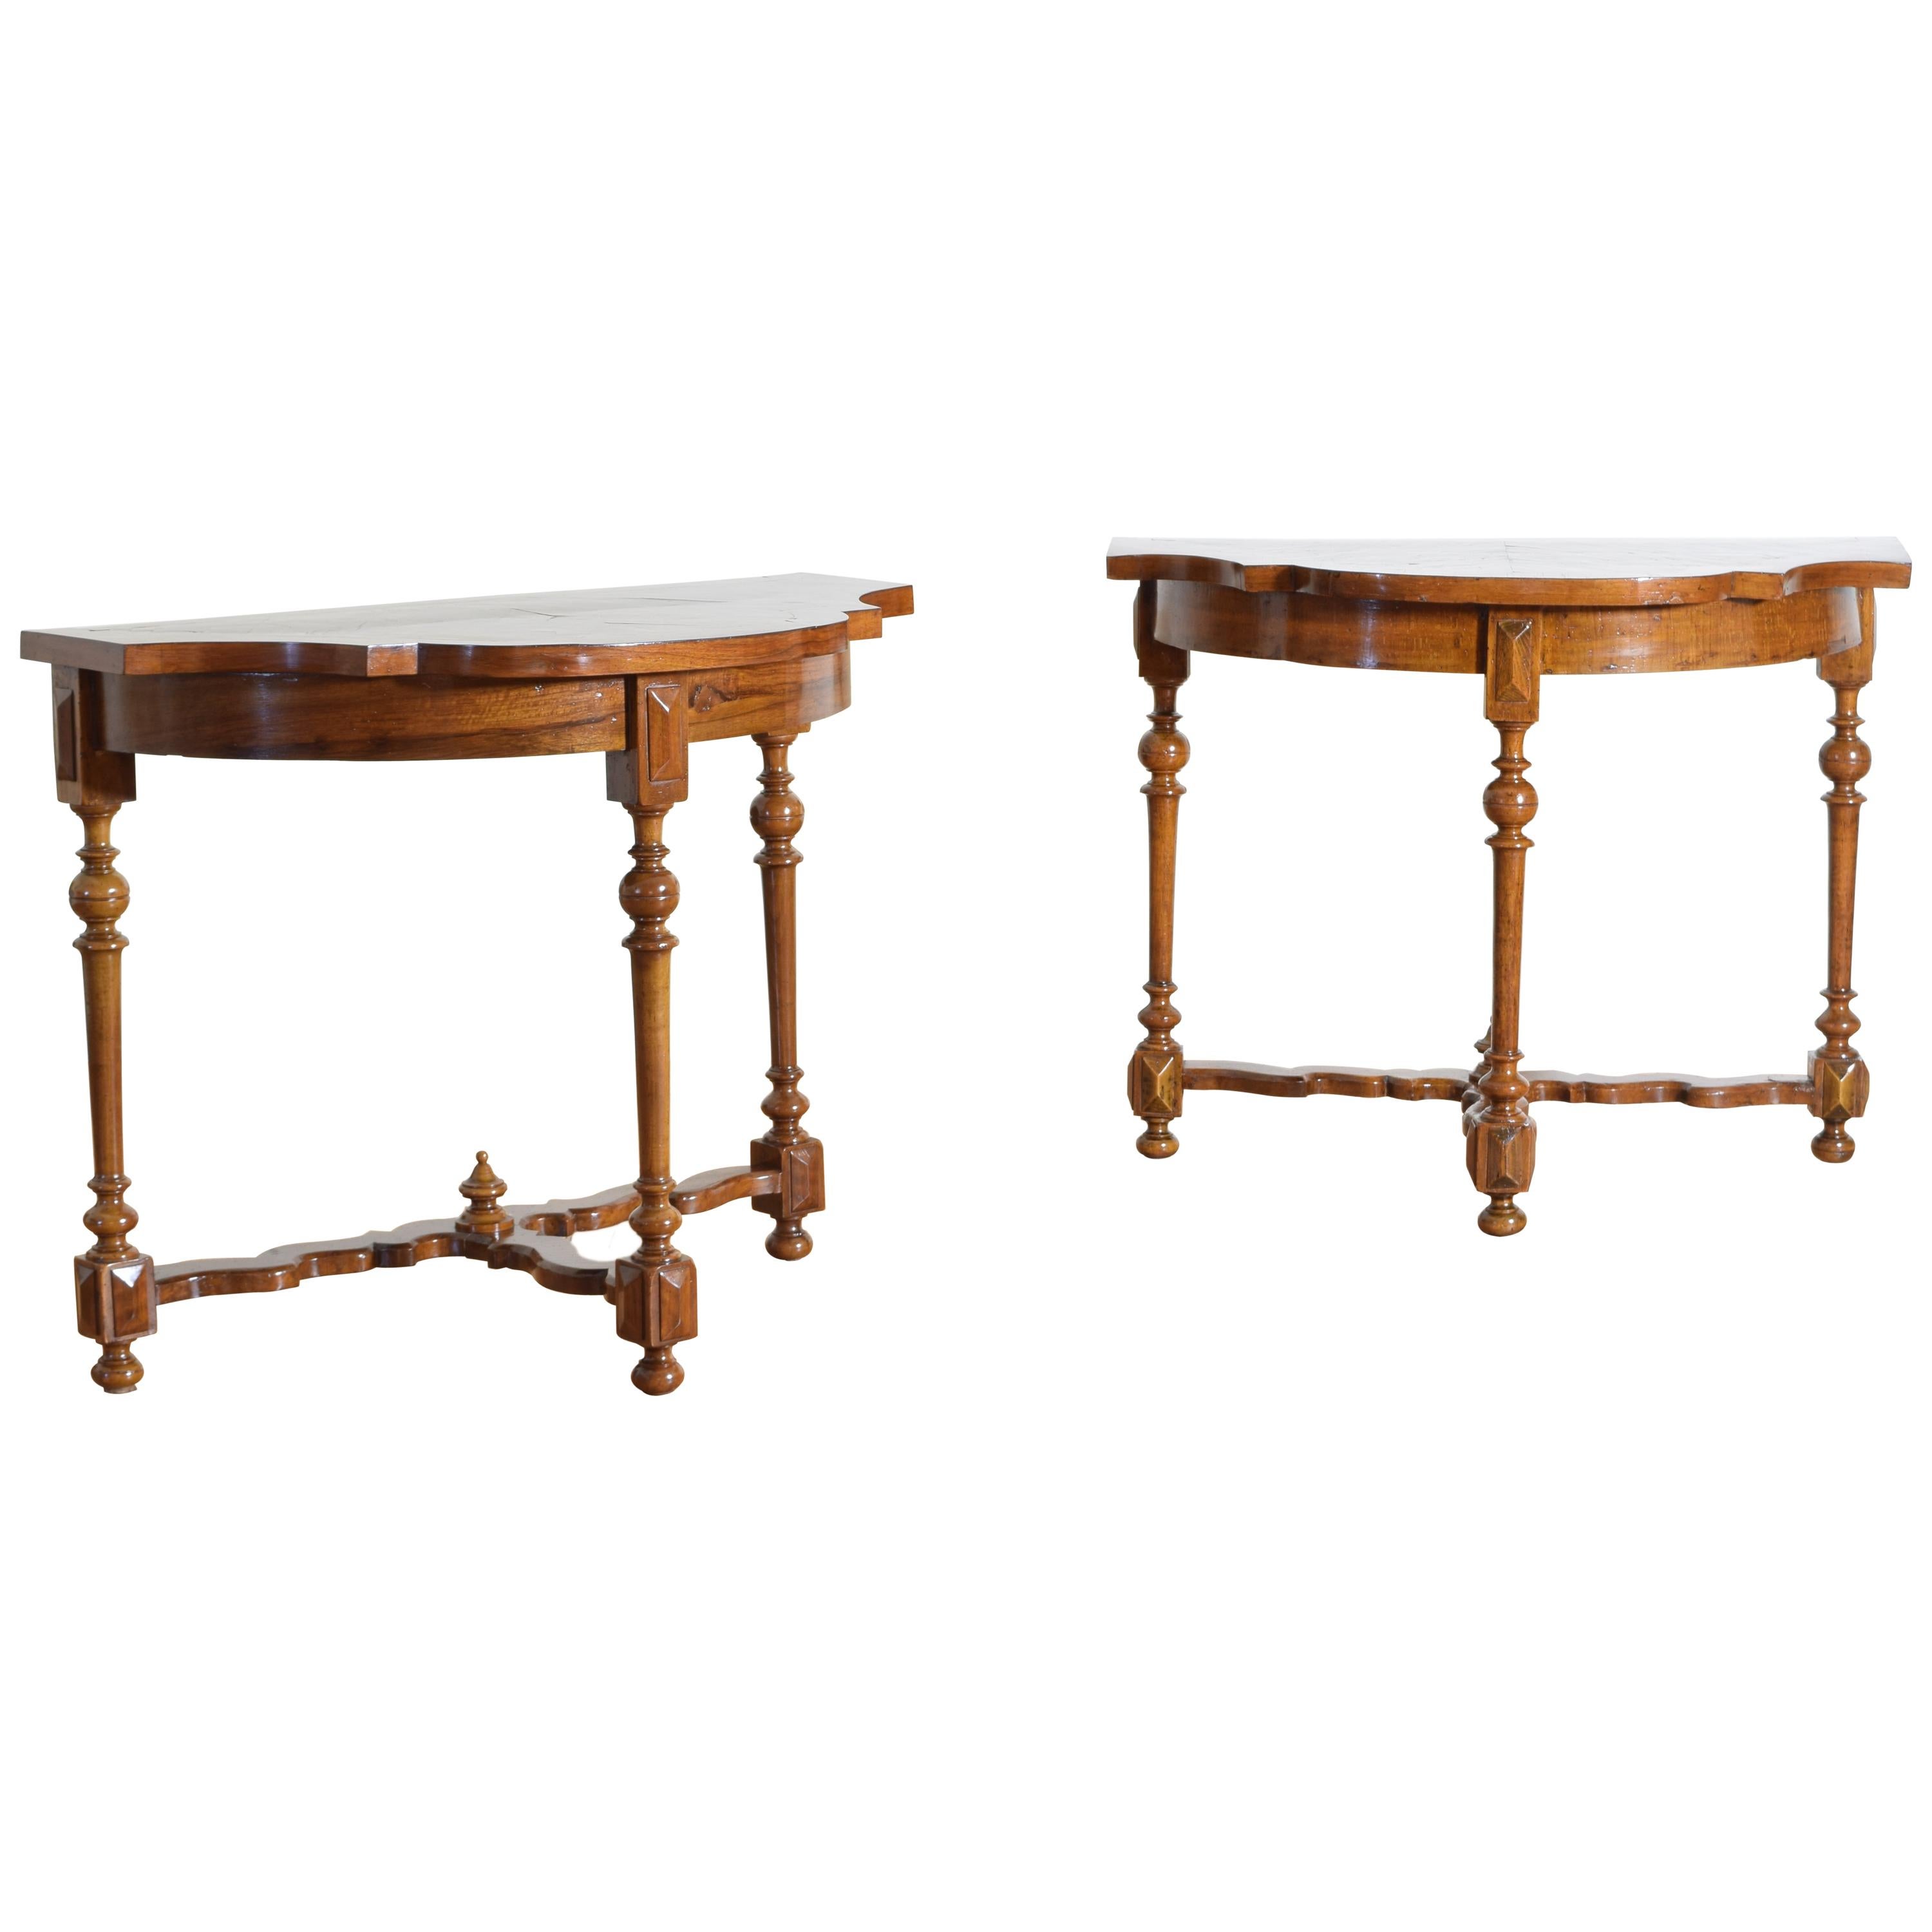 Pair Italian Louis XIV Period Olivewood & Walnut Console Tables, Early 18th Cen